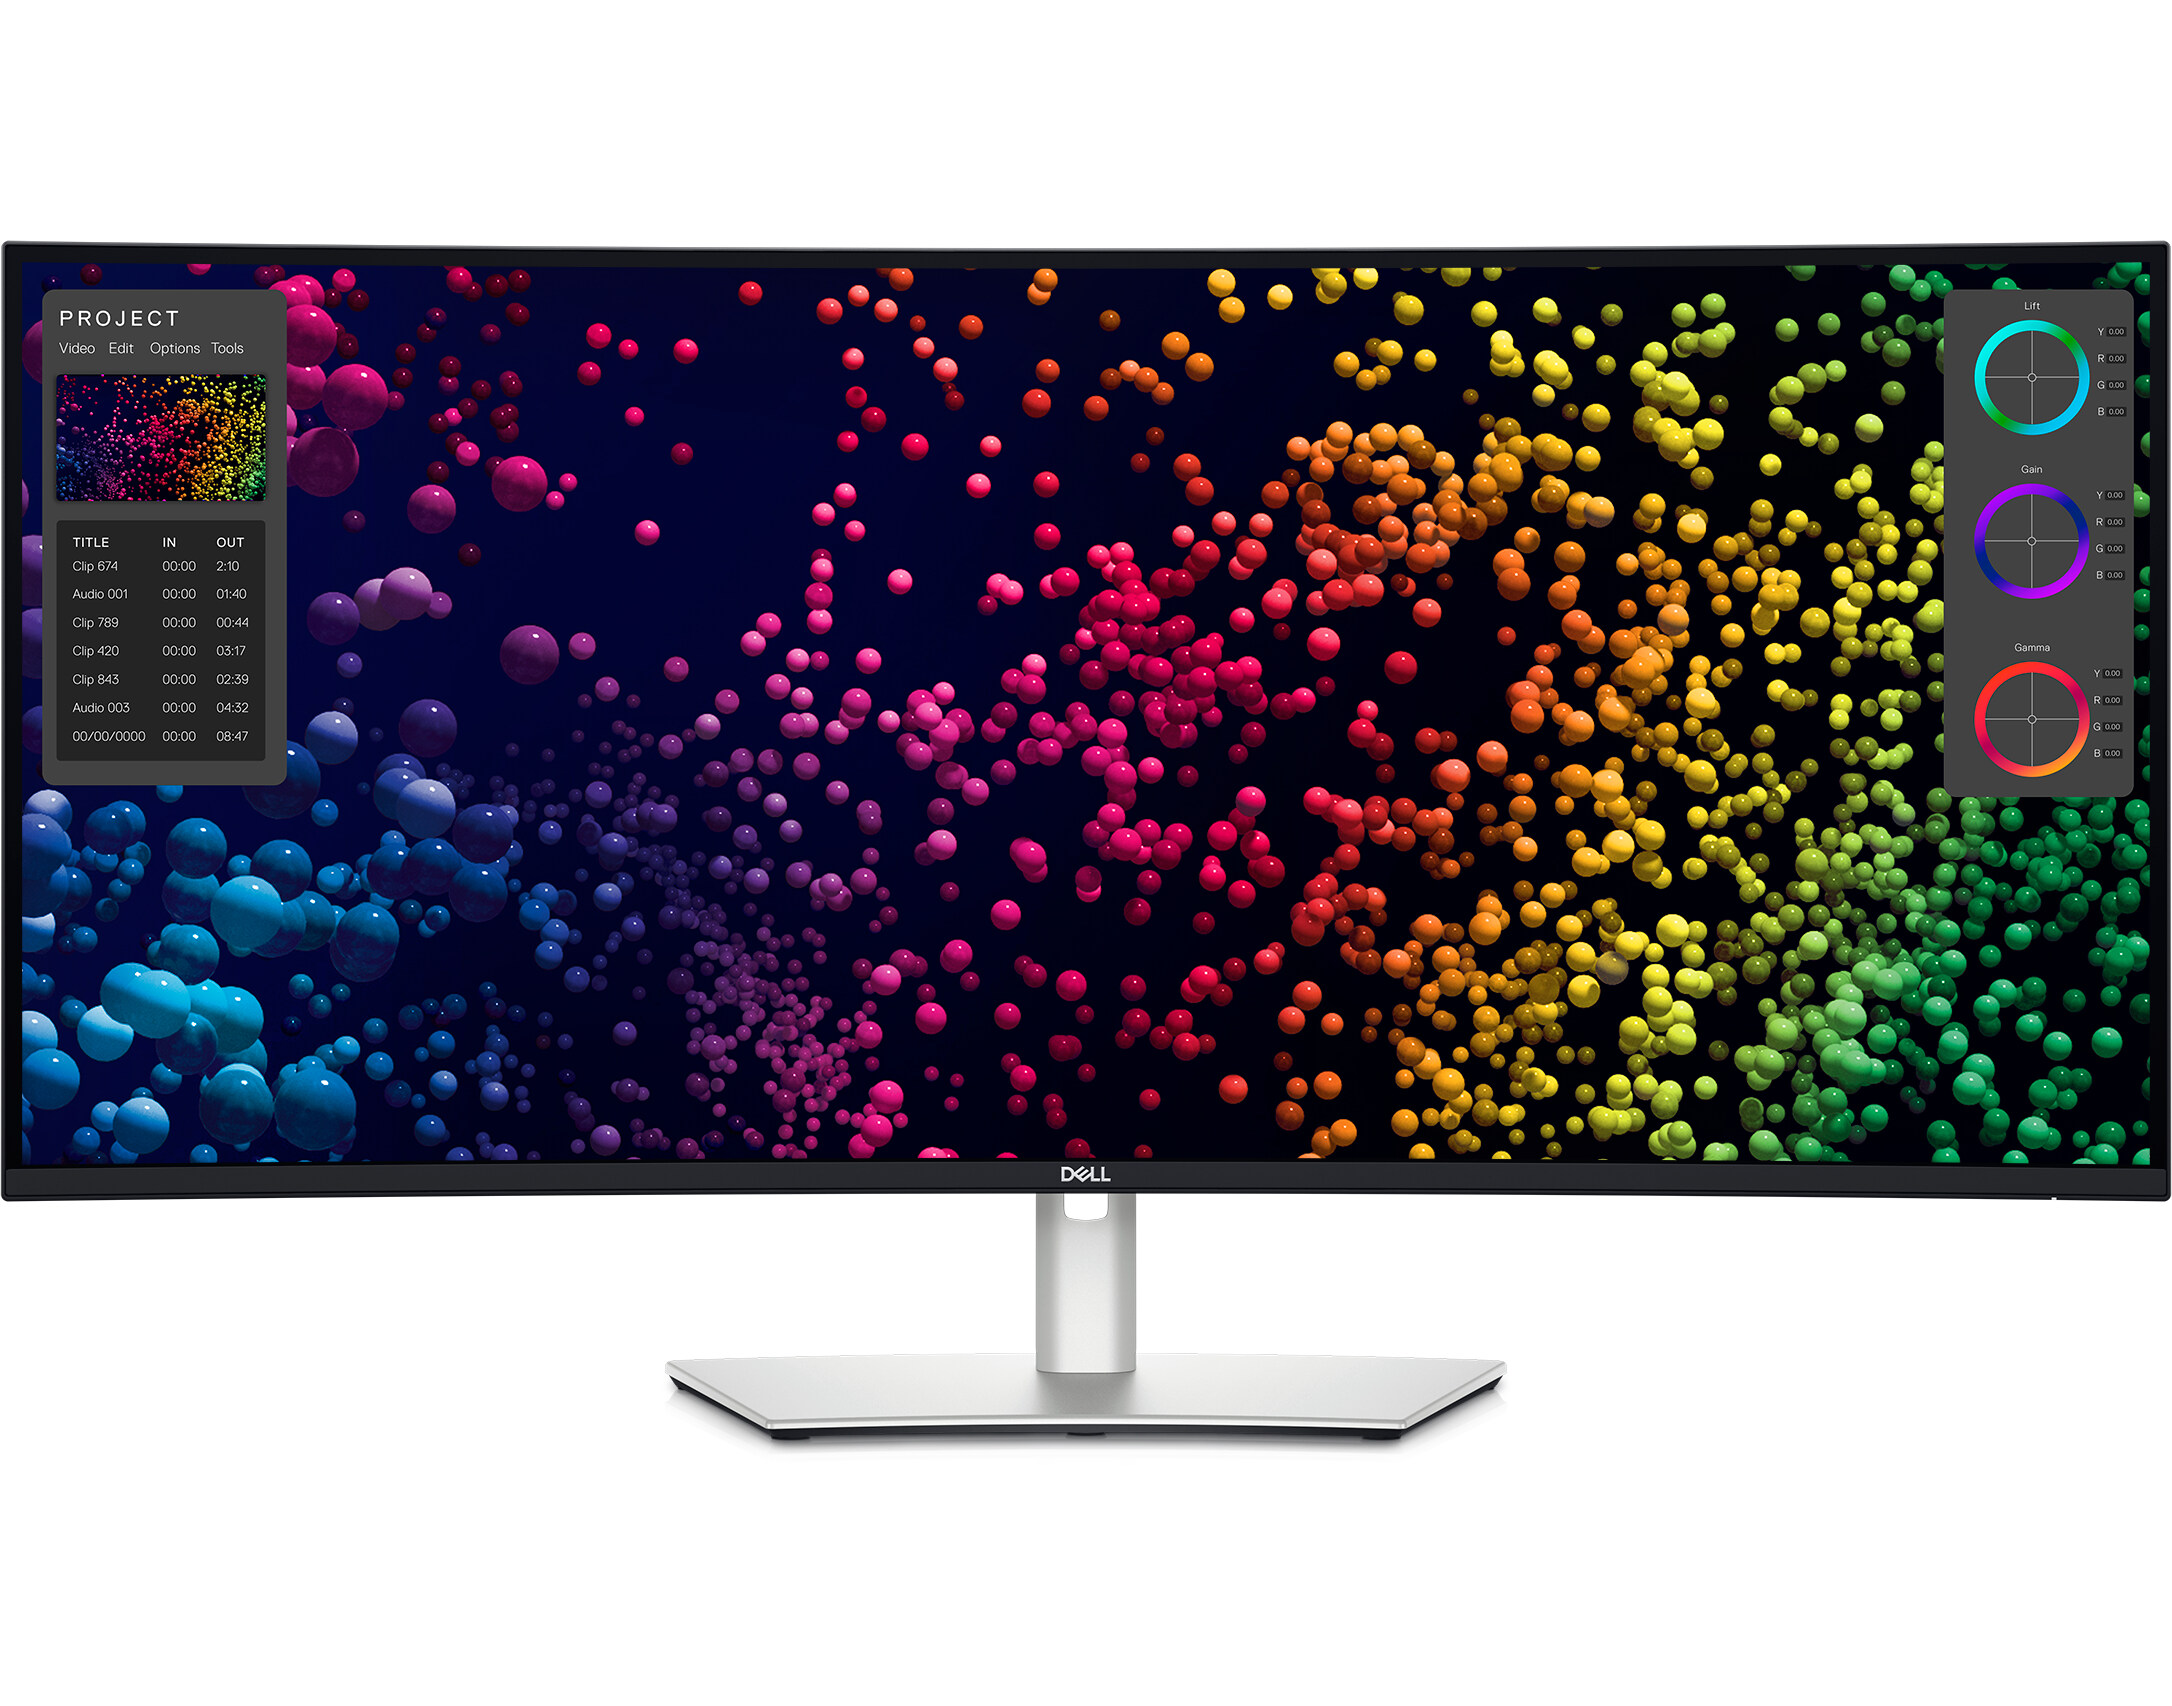 Ultrawide monitors remind us there's still much to learn about